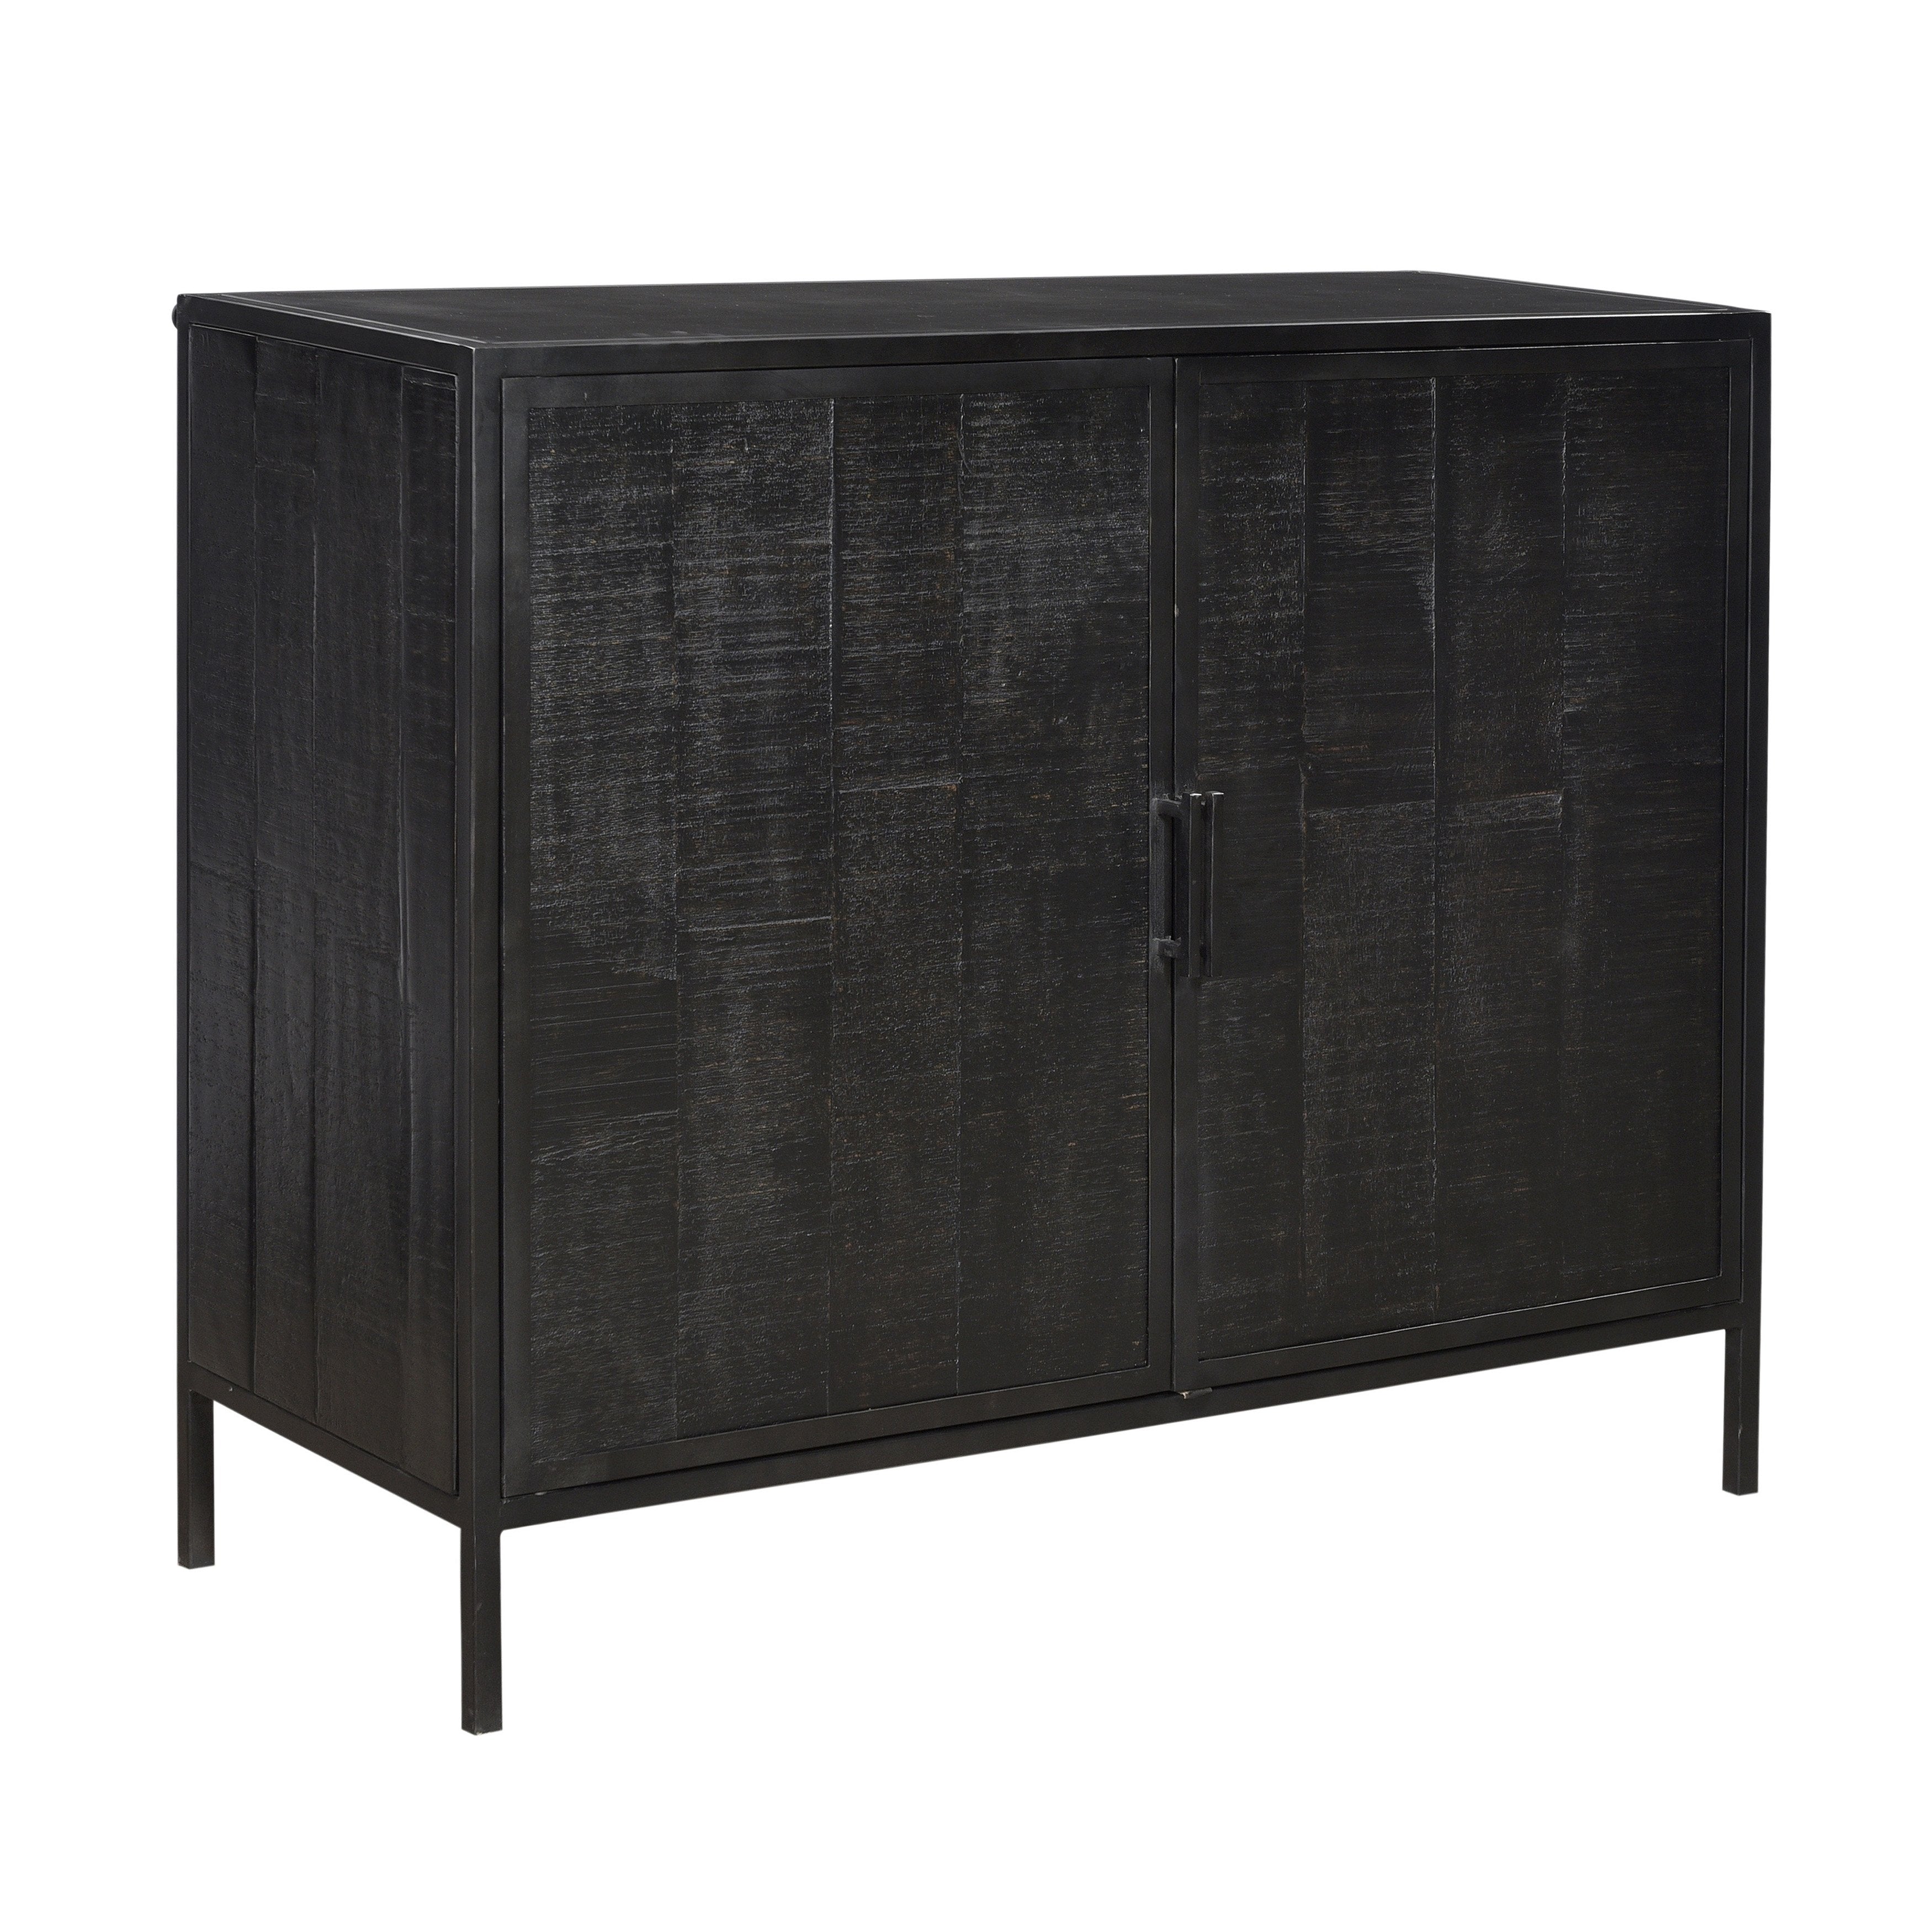 Dark and mysterious, this 42” sideboard makes for the perfect moody addition to your décor. Made from solid mango wood in a dark charcoal antique finish, this two-door sideboard is ready to meet all your storage and design needs. The set of butterfly doors open to large cabinet space with an interior shelf. Amethyst Home provides interior design, new home construction design consulting, vintage area rugs, and lighting in the Charlotte metro area.